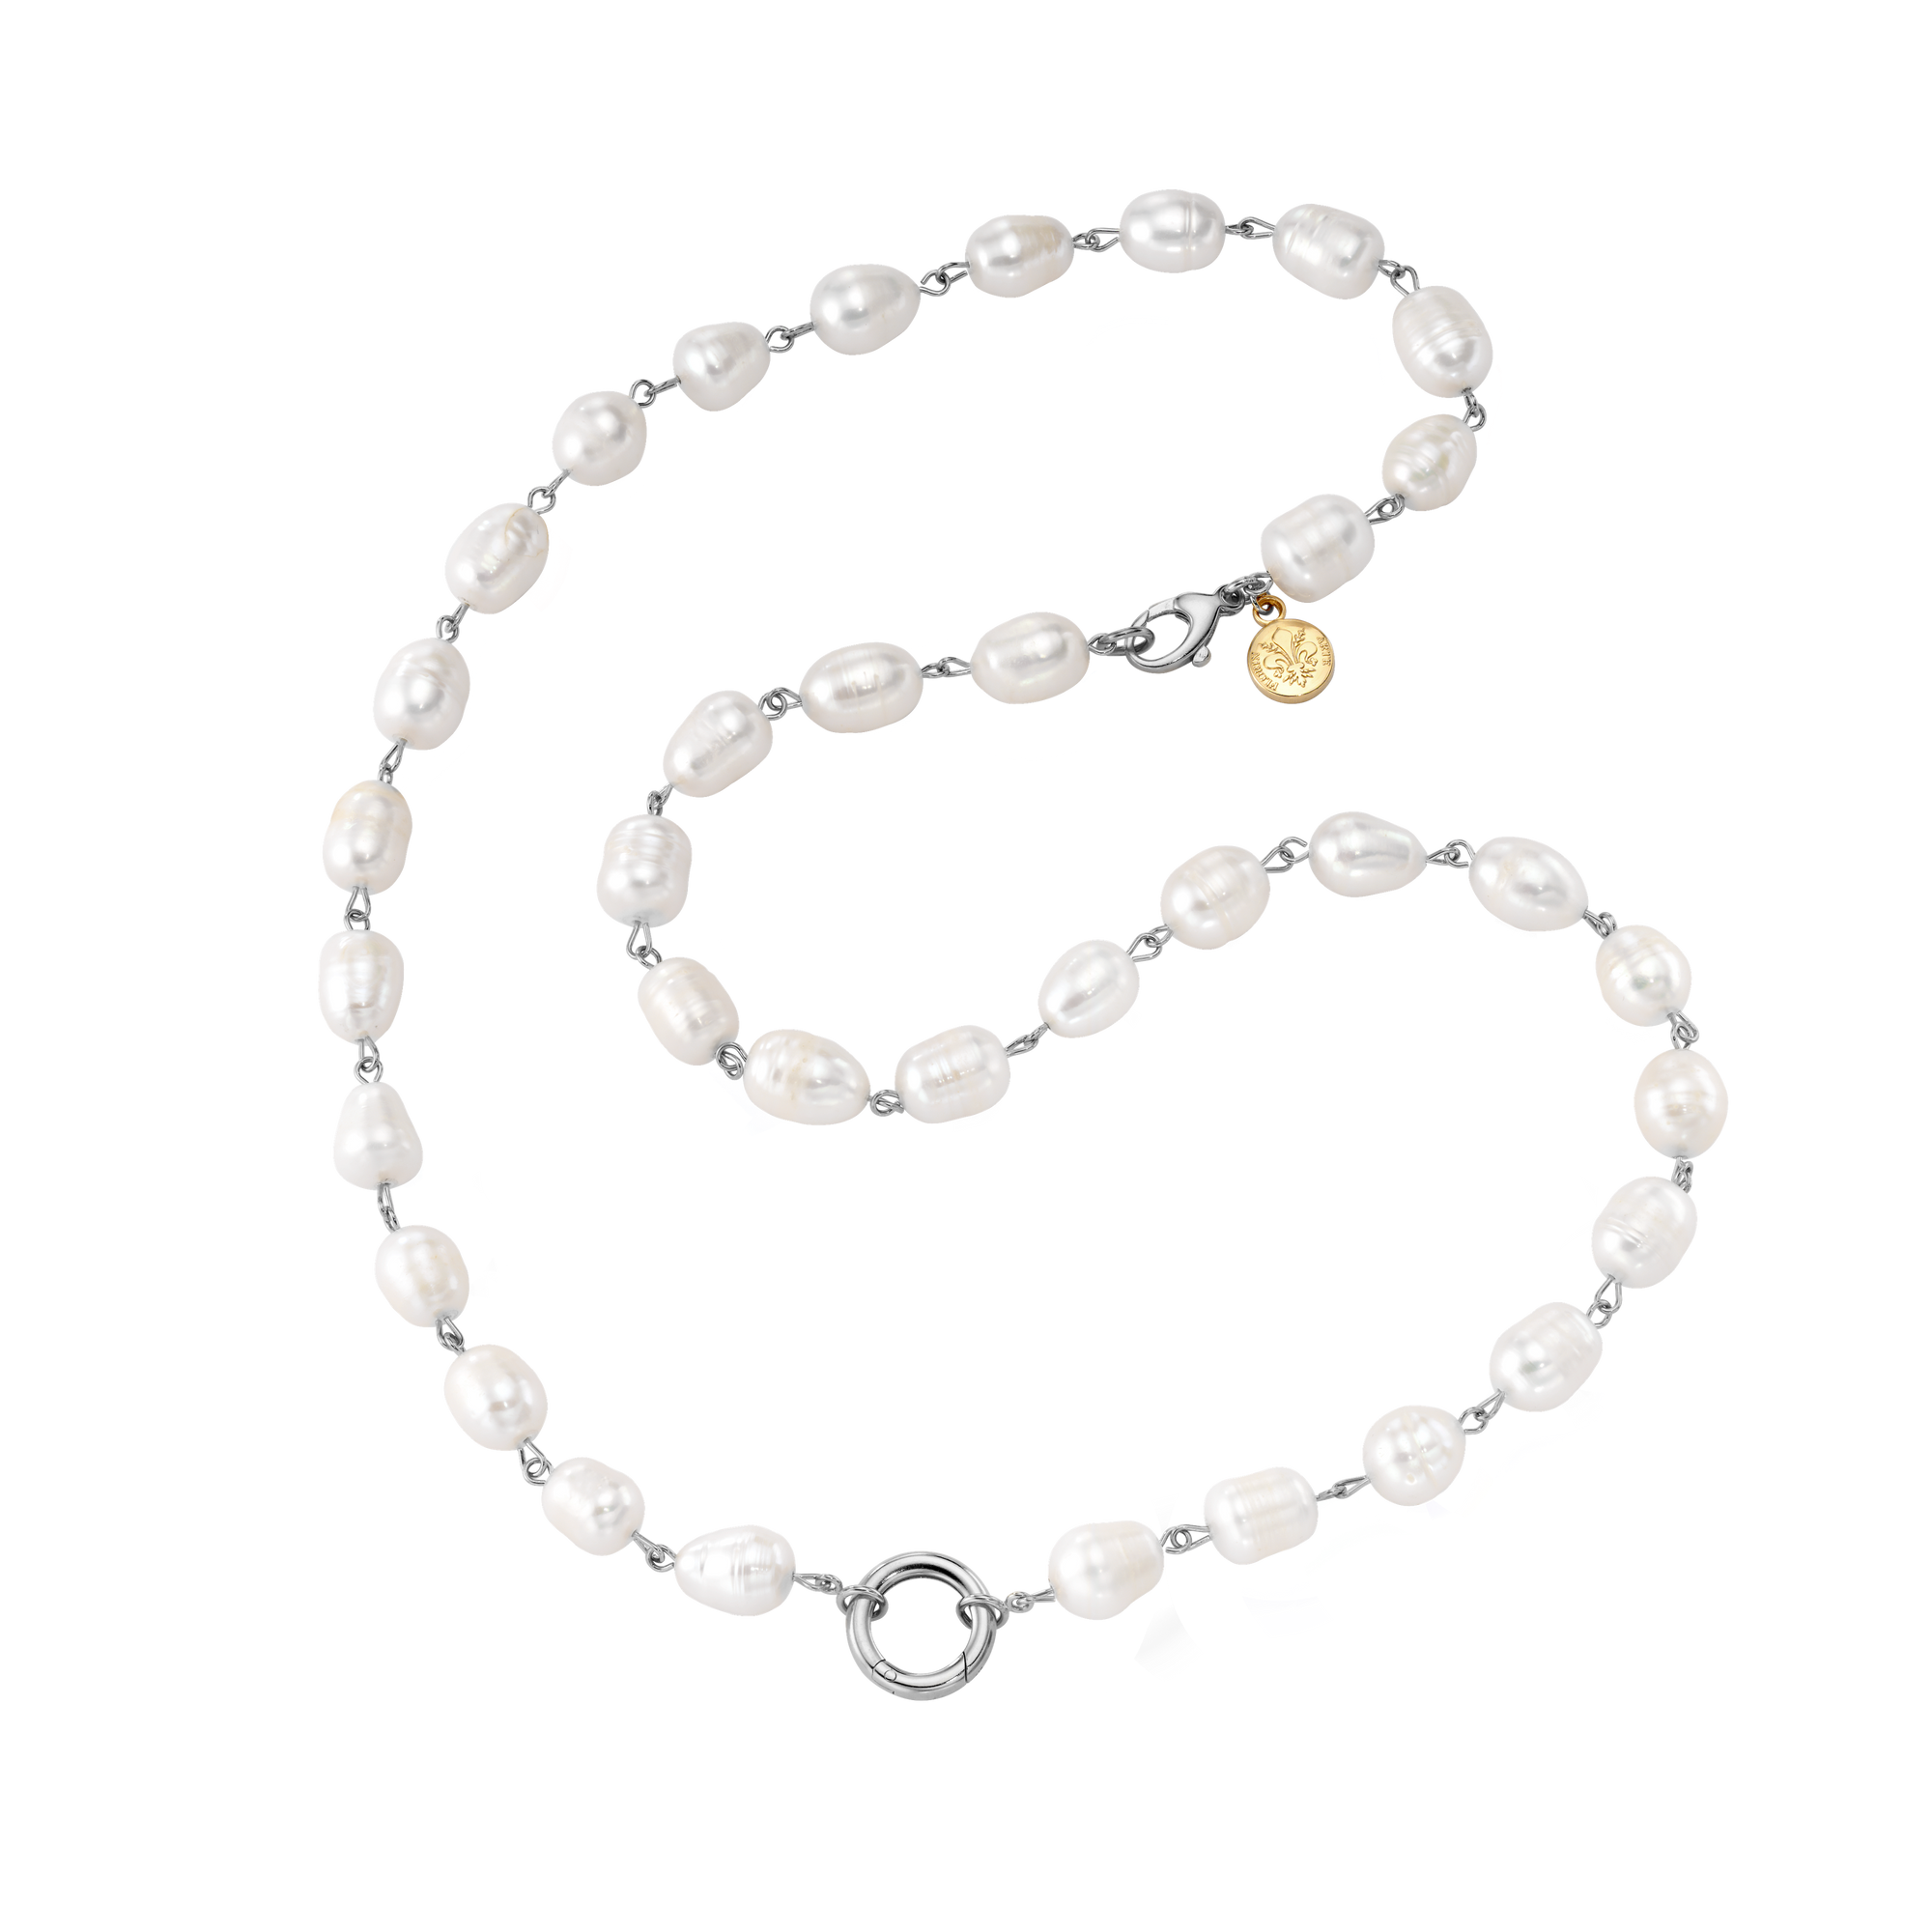 Inspired Essentials Pearl Loop Charm Necklace - 24"